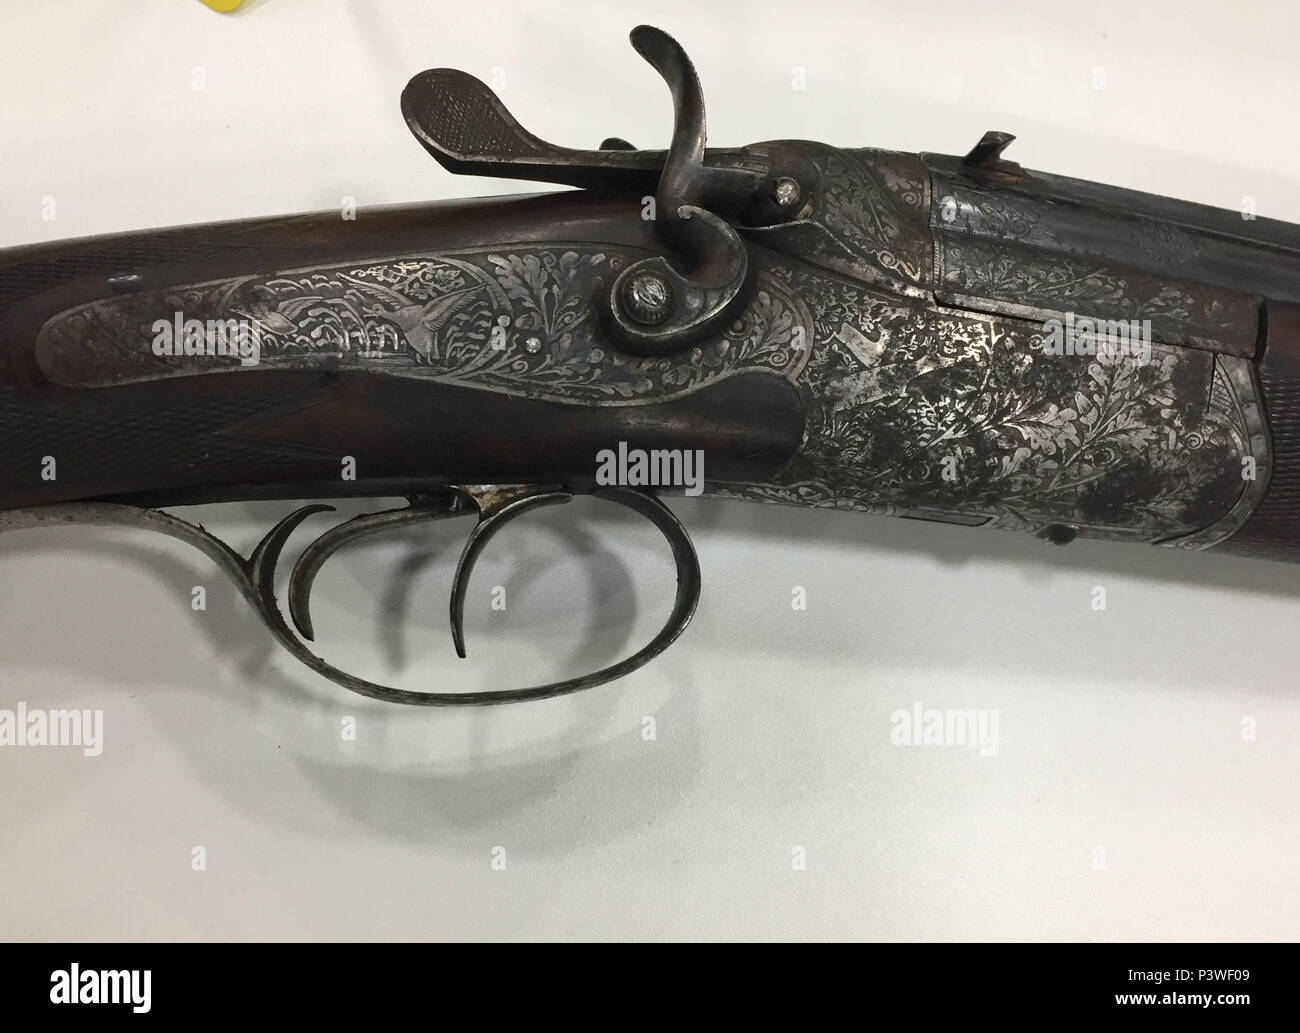 Exquisitely detailed metalwork and engraving on the trigger mechanisms of a hunting shotgun which was among weaponry handed in during a West Midlands Police firearms surrender. In all there were 116 seizures, including 36 lethal or convertible firearms. Stock Photo